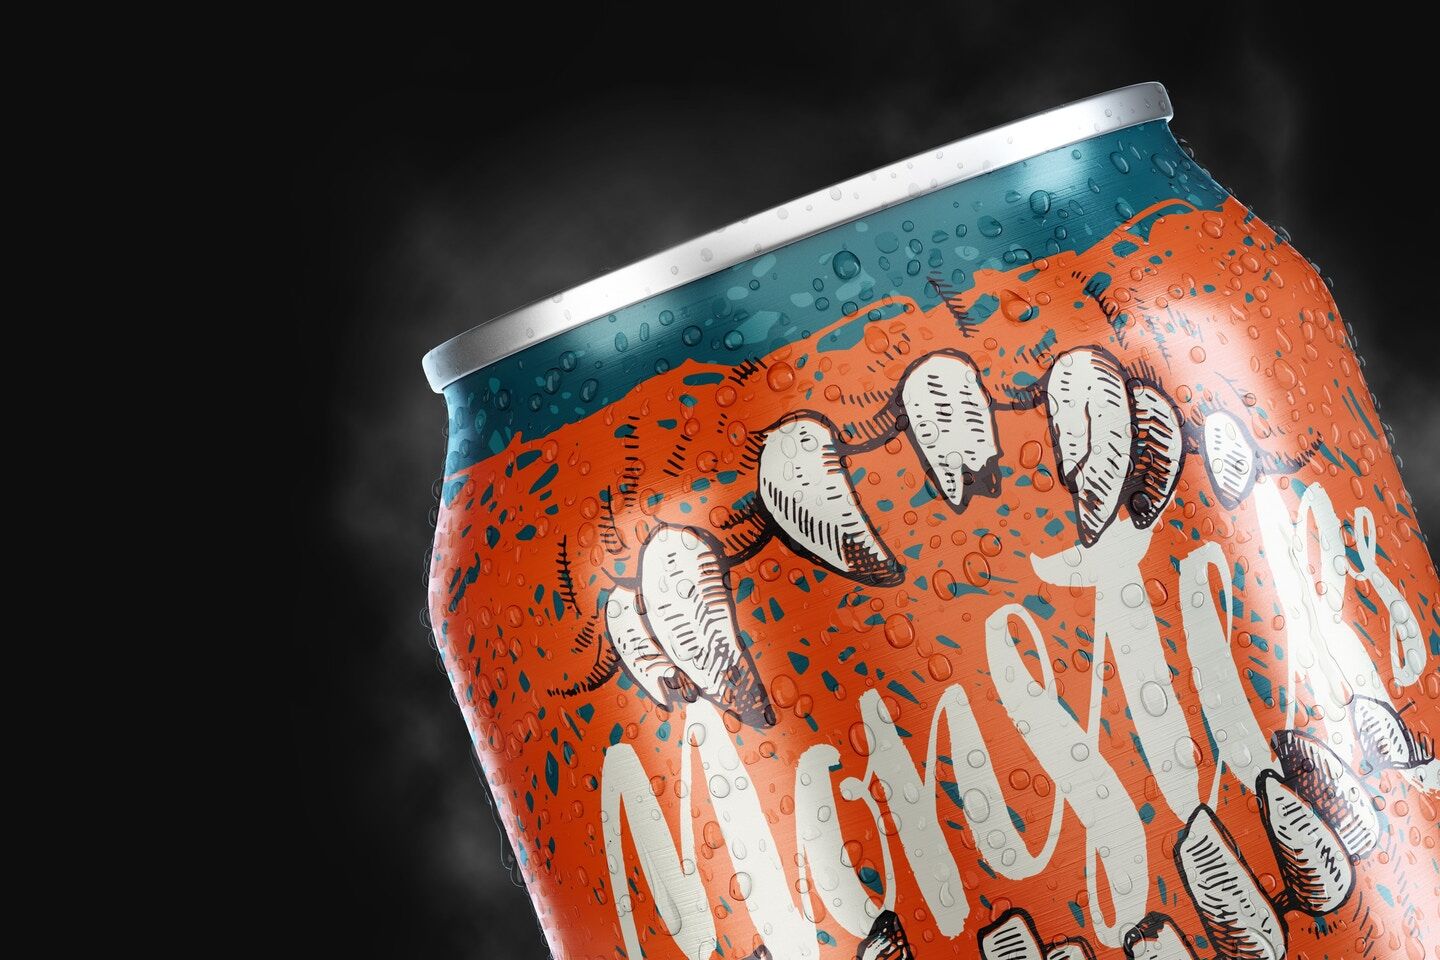 Front View Soda Can Mockup FREE PSD